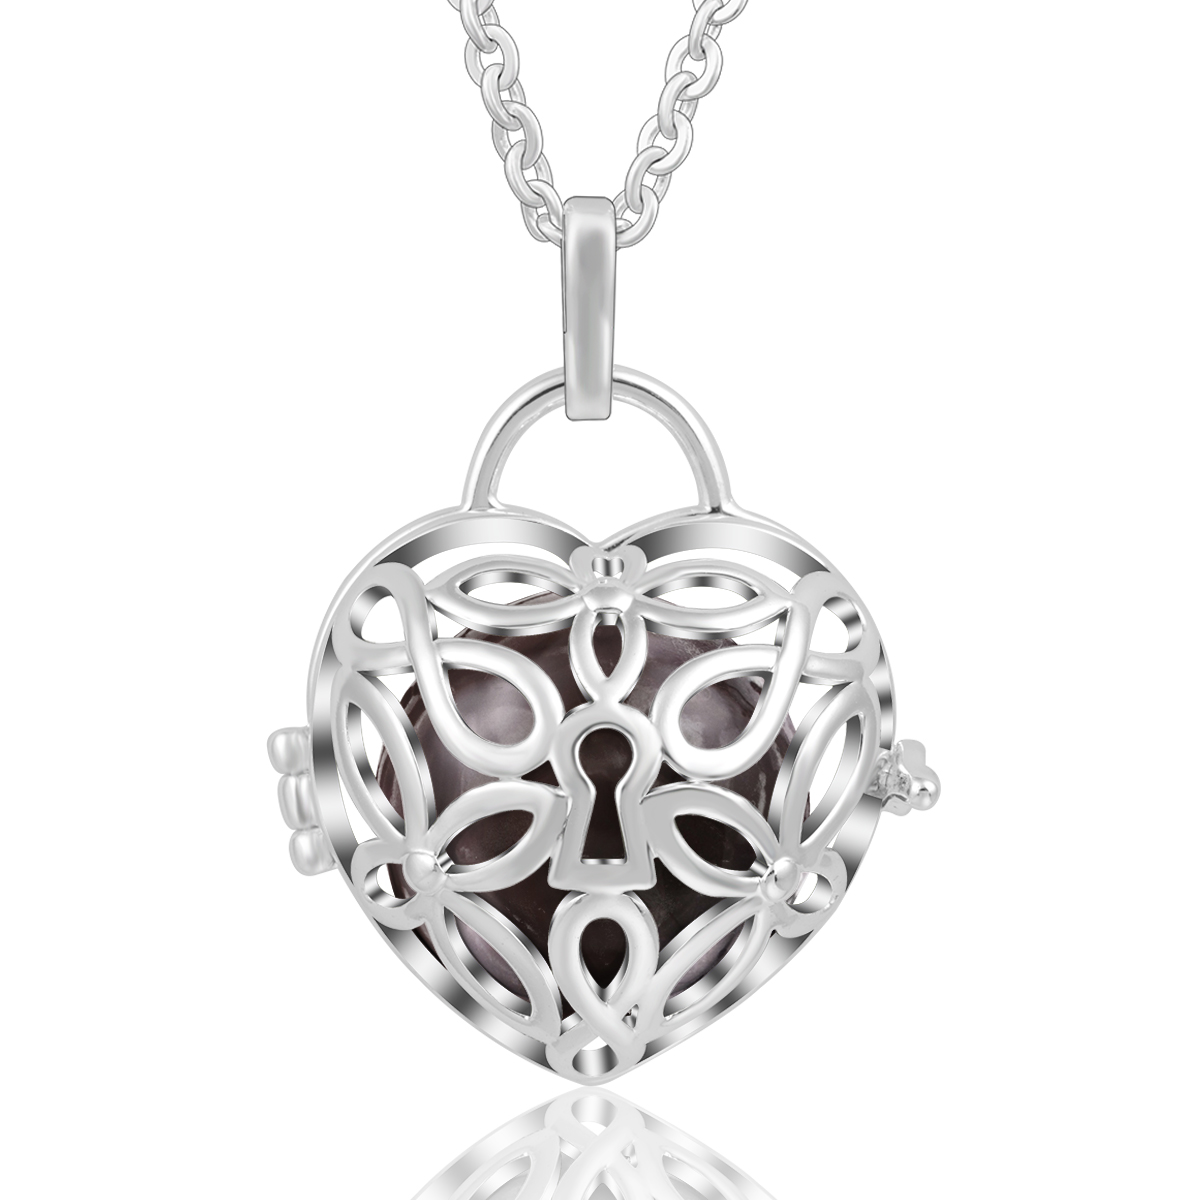 Heart Shaped Angel Callers Mexican Harmony Musical Bola Ball Cage Pendant for Women